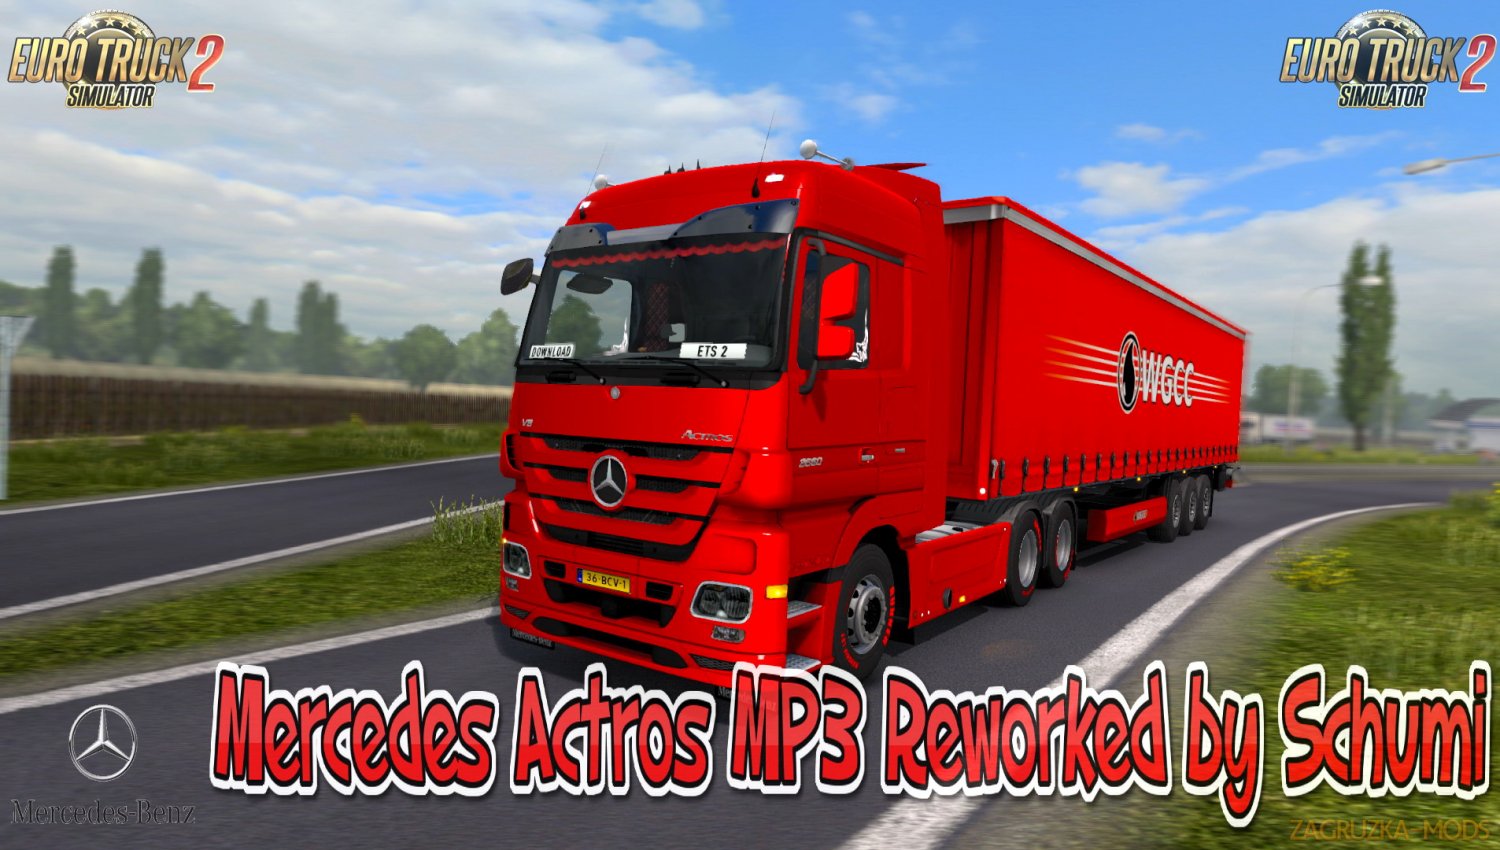 Mercedes Actros MP3 Reworked v2.7 by Schumi [1.33.x]